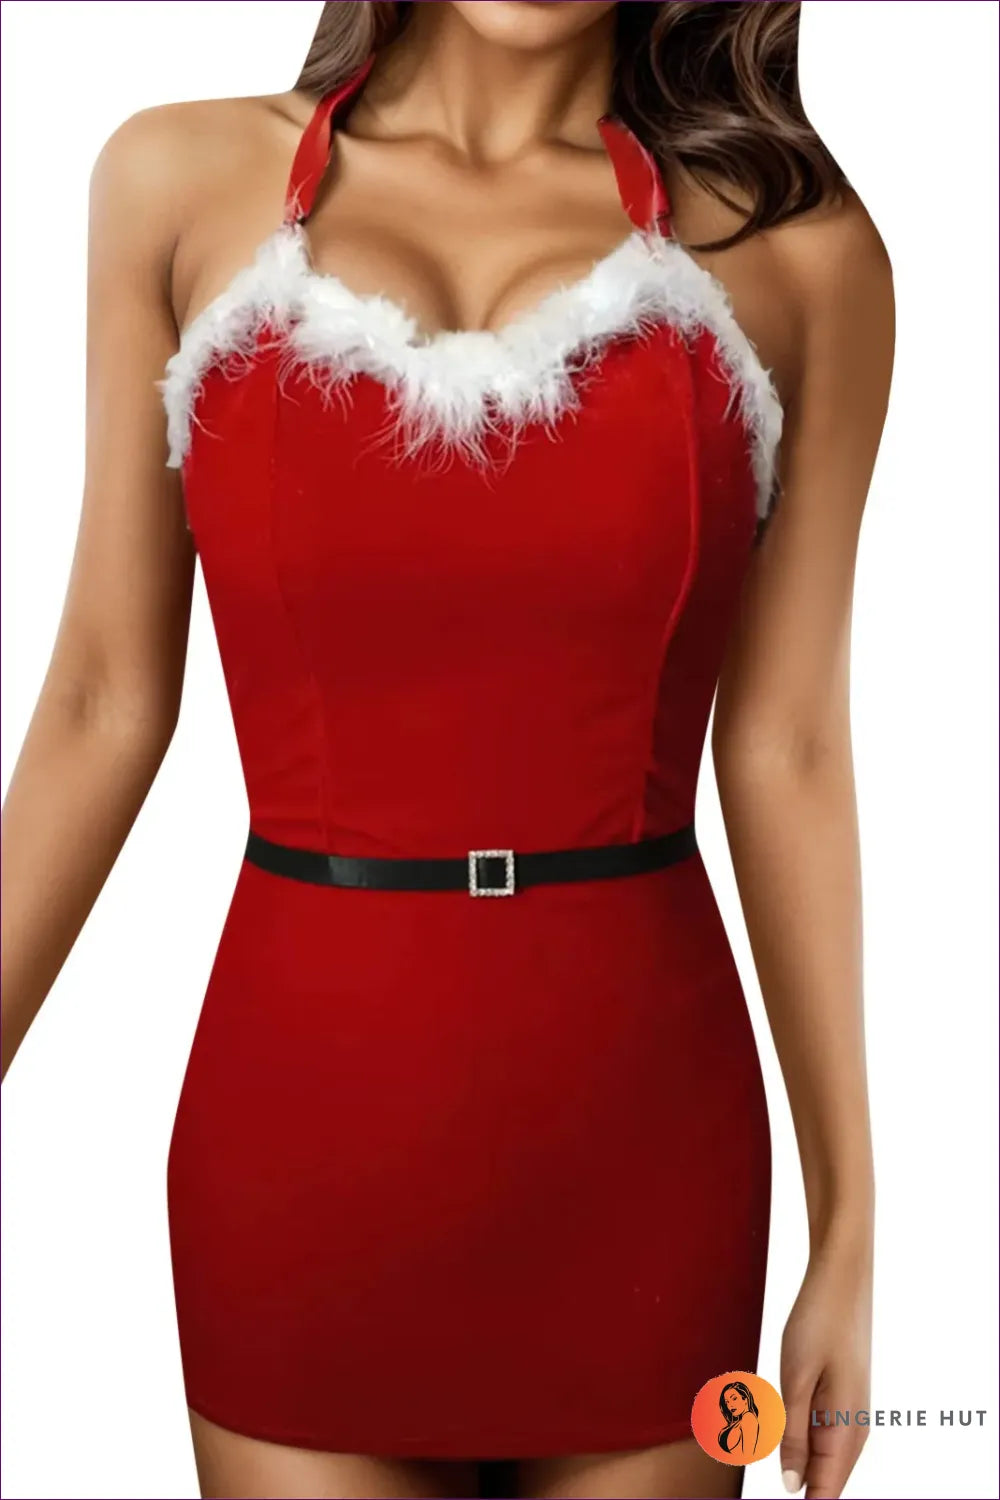 Step Into The Holiday Season With Lingerie Hut’s Yuletide Charm Bodycon Mini Dress. Fit, Fur Trim,